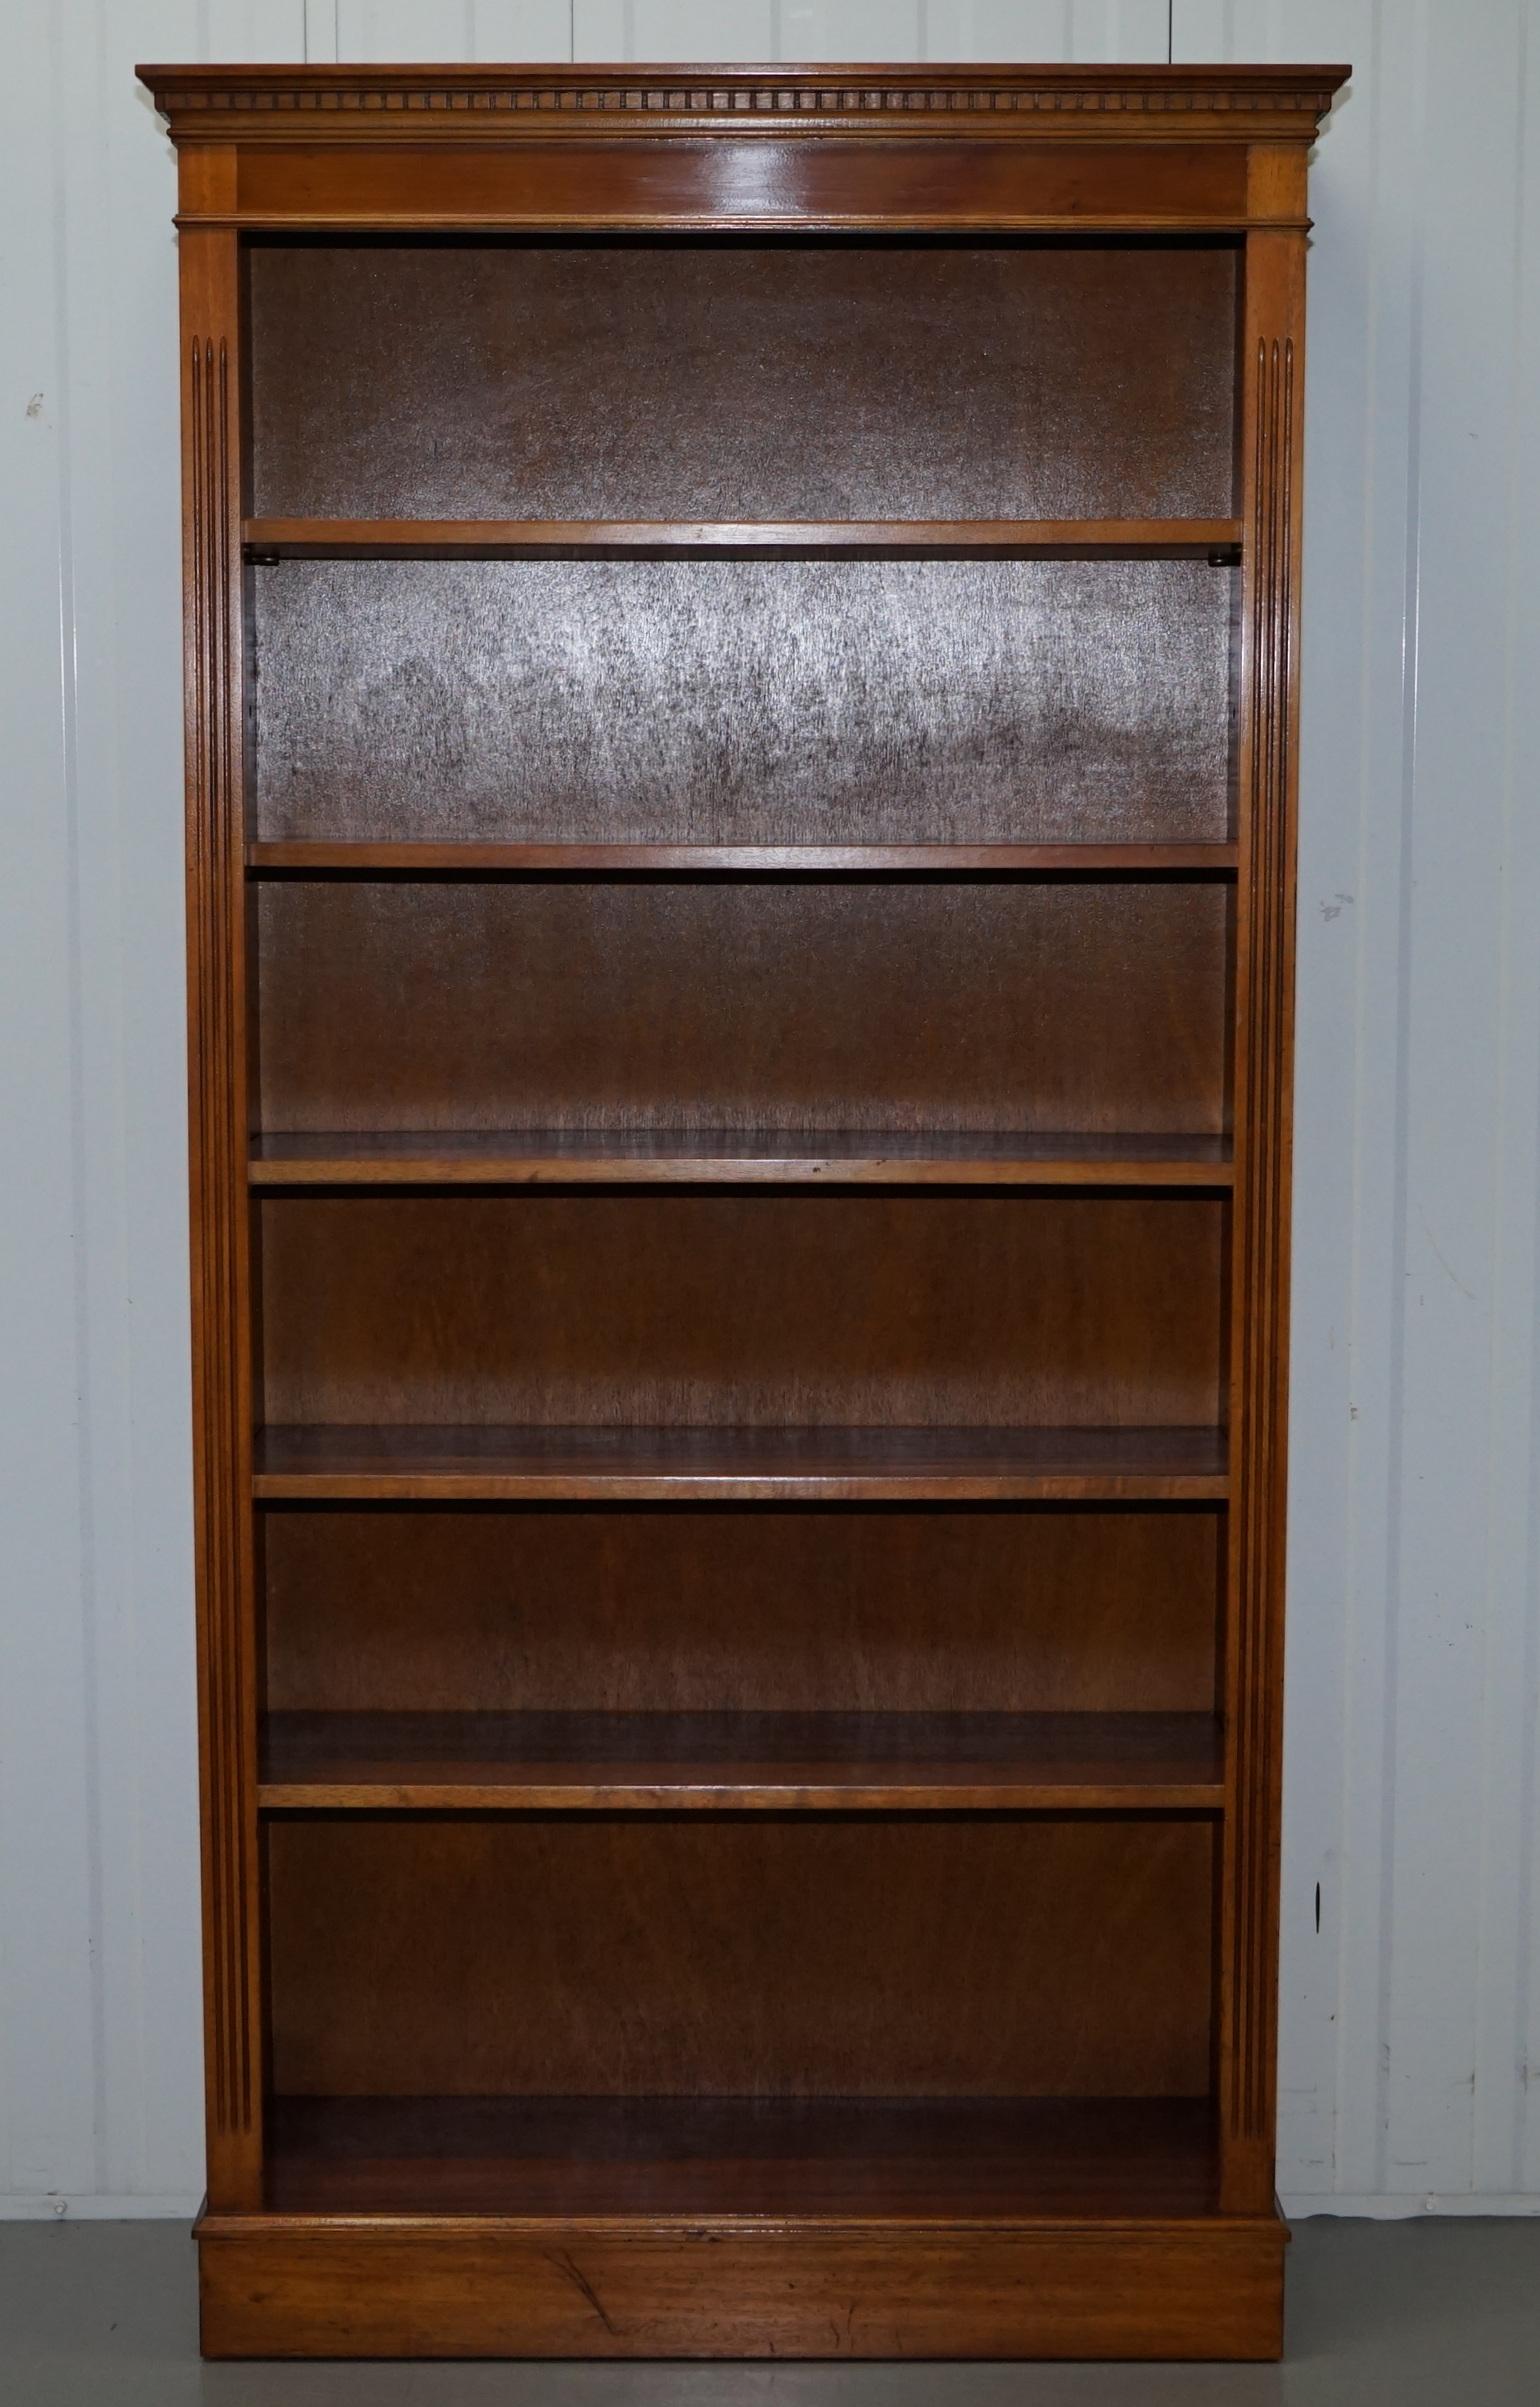 We are delighted to offer for sale this very nice vintage burr yew wood library bookcase with adjustable shelves

A good looking and well made piece in excellent order throughout, all shelves can be removed and or height adjusted

We have